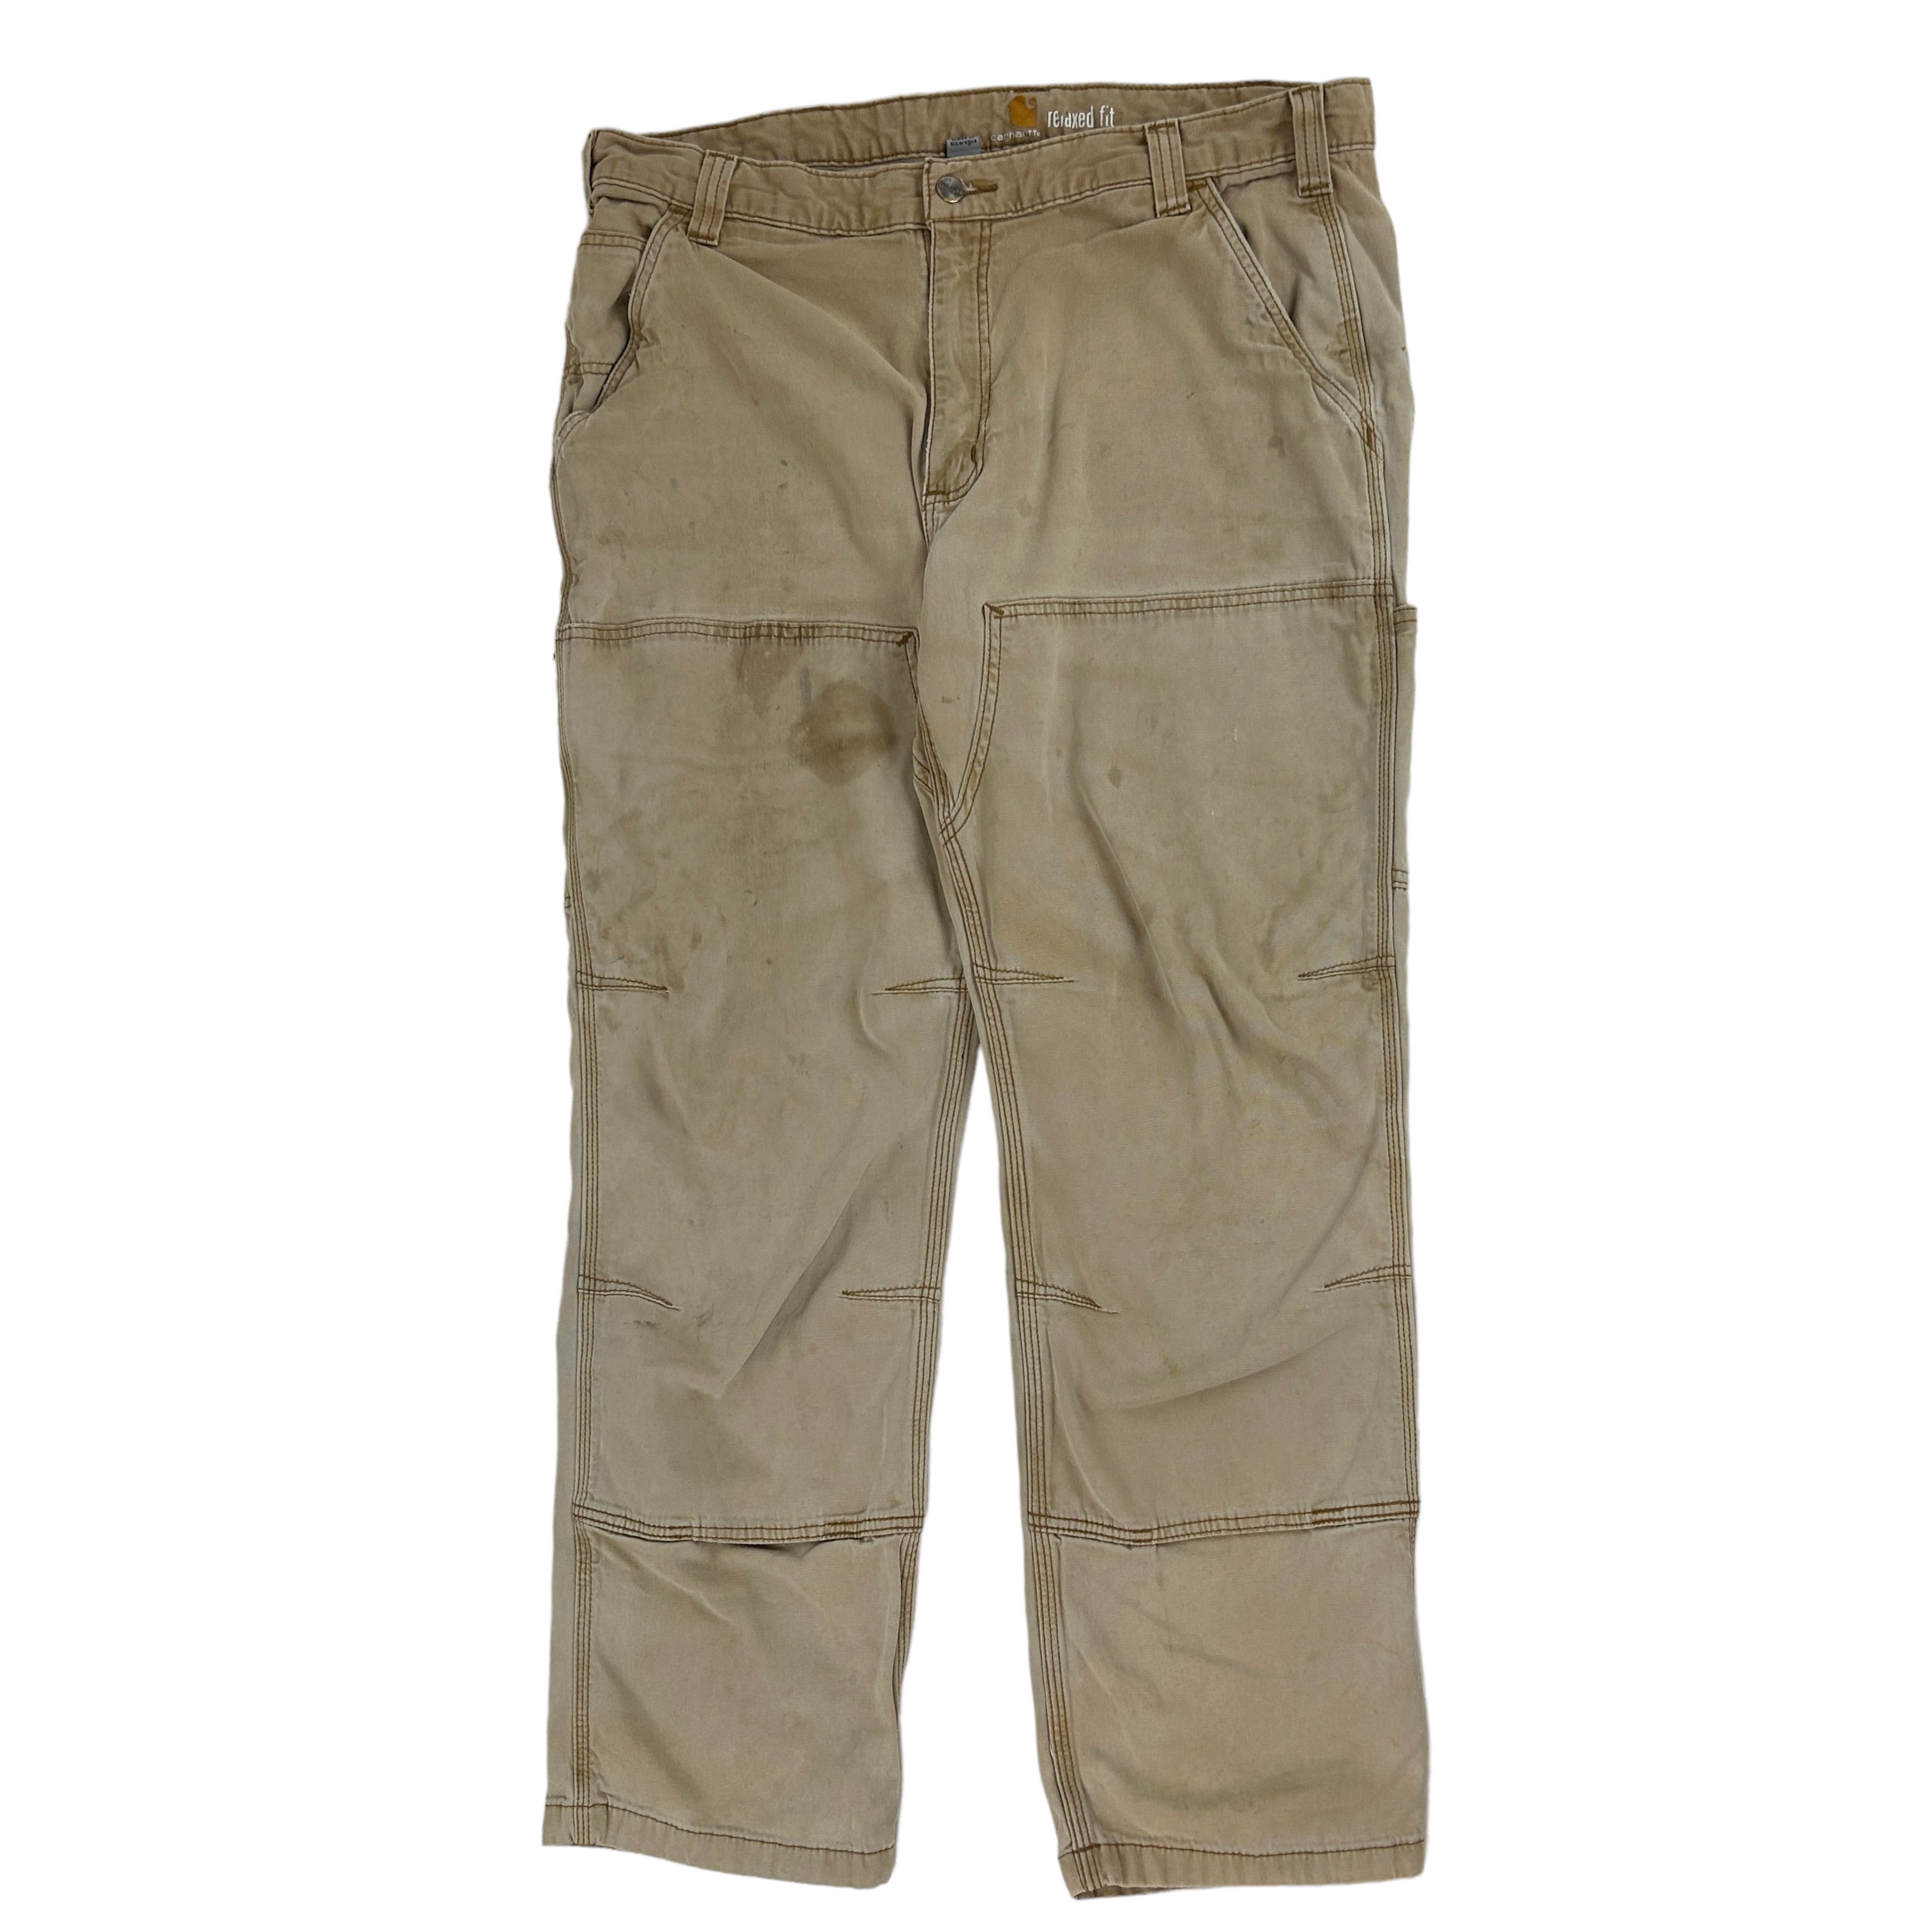 Vintage Carhartt Tan Relaxed Fit Double Knee